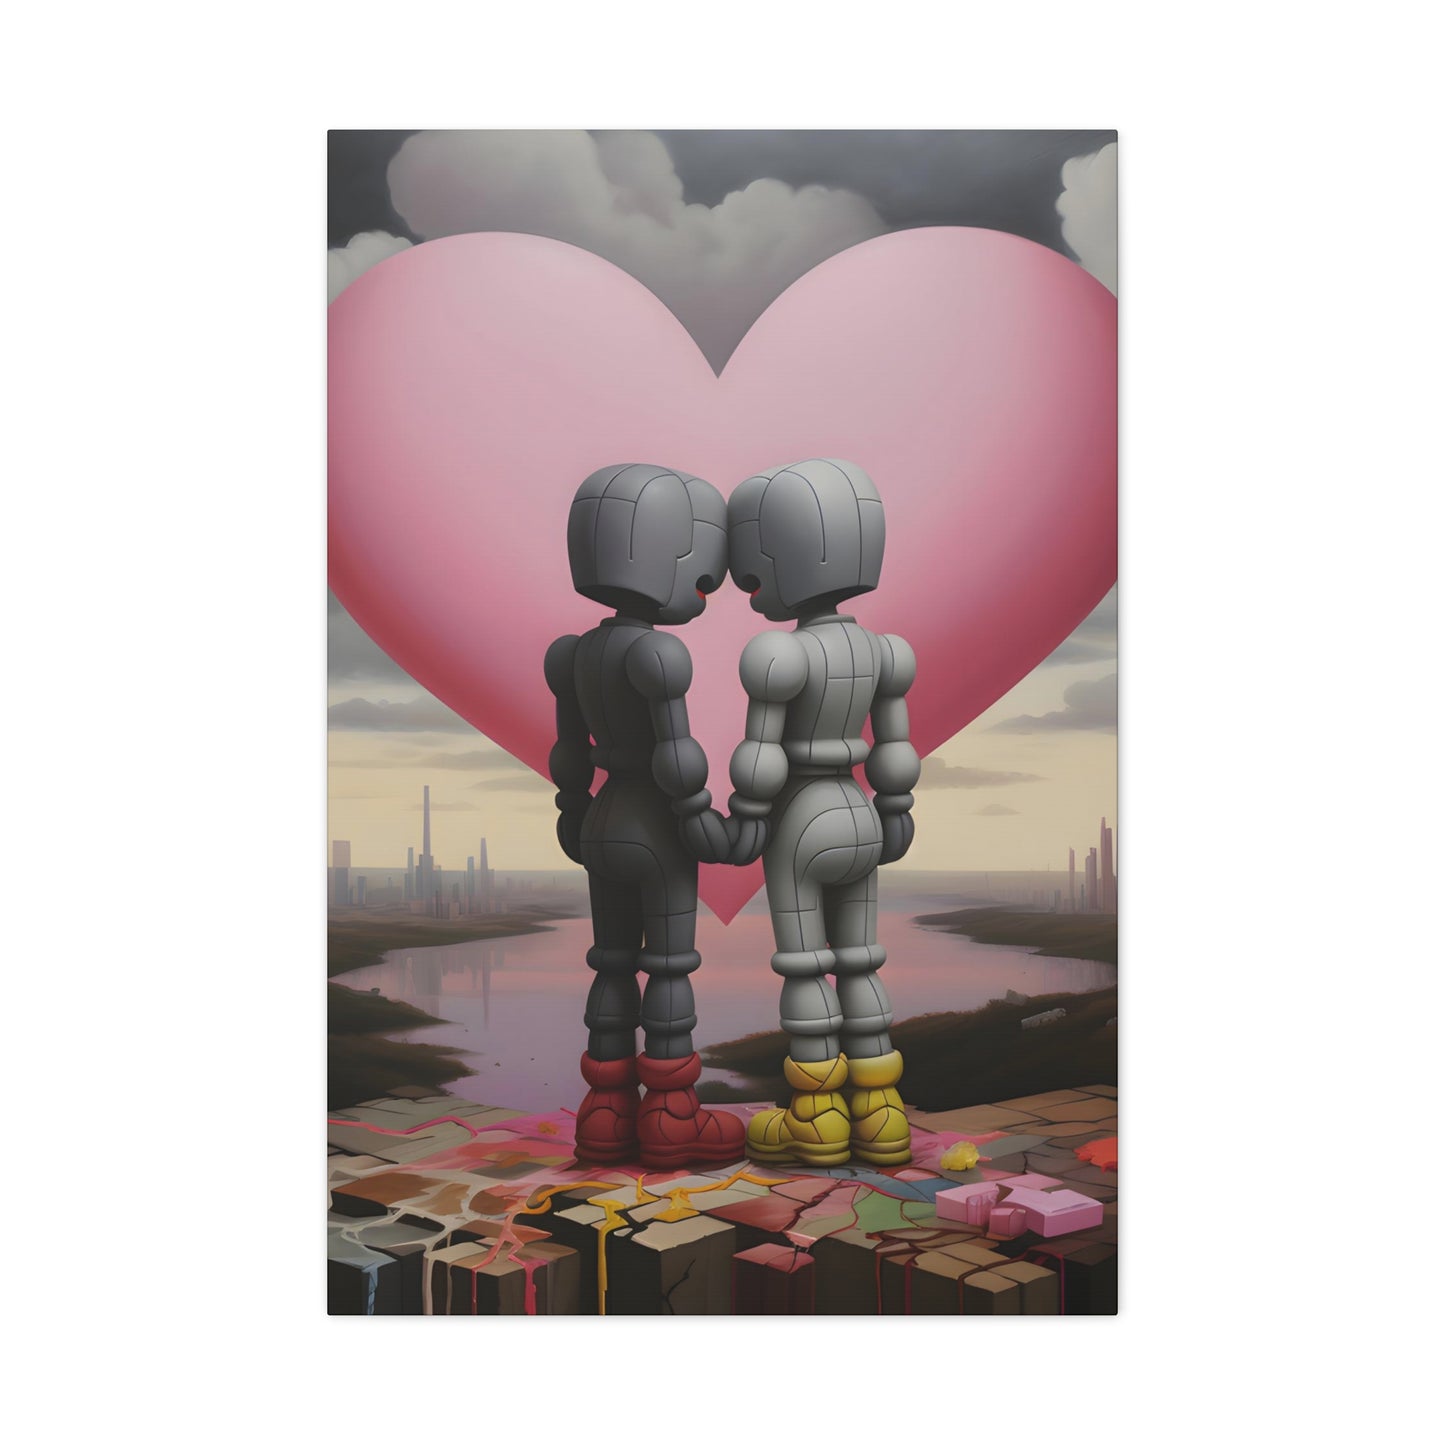 image 4 Contemporary artwork by Archer Dent, reflecting on connection in a mechanized era, blending urban surrealism with a tender embrace against a stark cityscape, provoking thoughts on love amidst modernity.